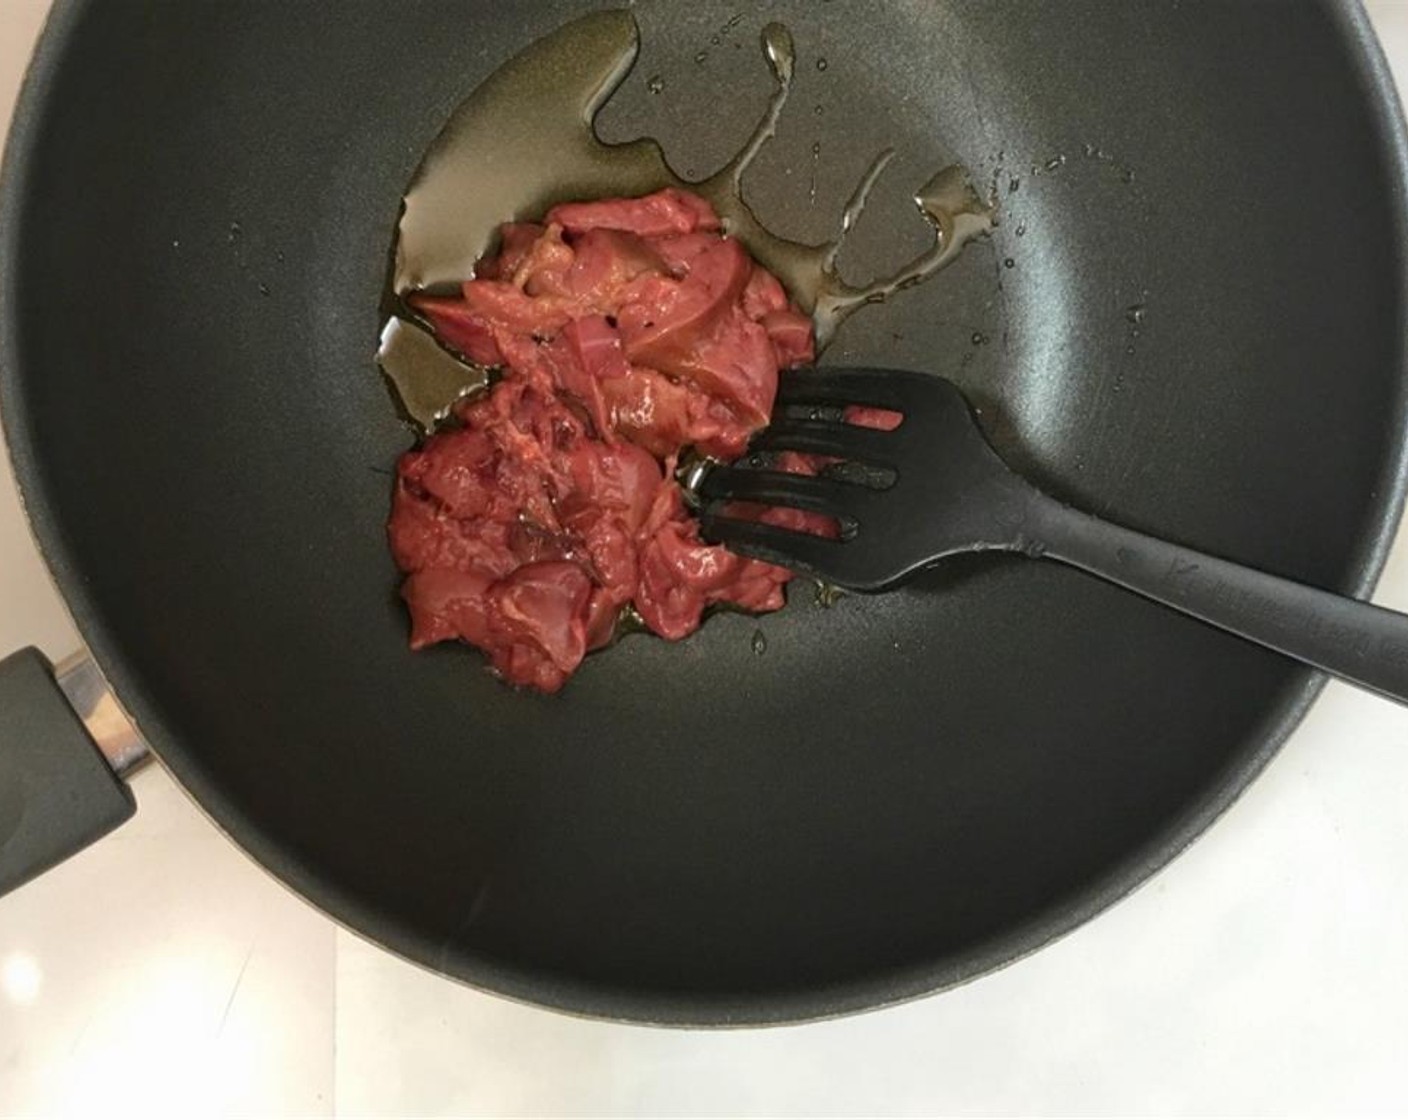 step 1 Chop the chicken livers up into small bits. Pour a little Vegetable Oil (as needed) into a large wok or non-stick pan and place it over medium-high heat. Once the oil is hot, add the Chicken Livers (7 oz).